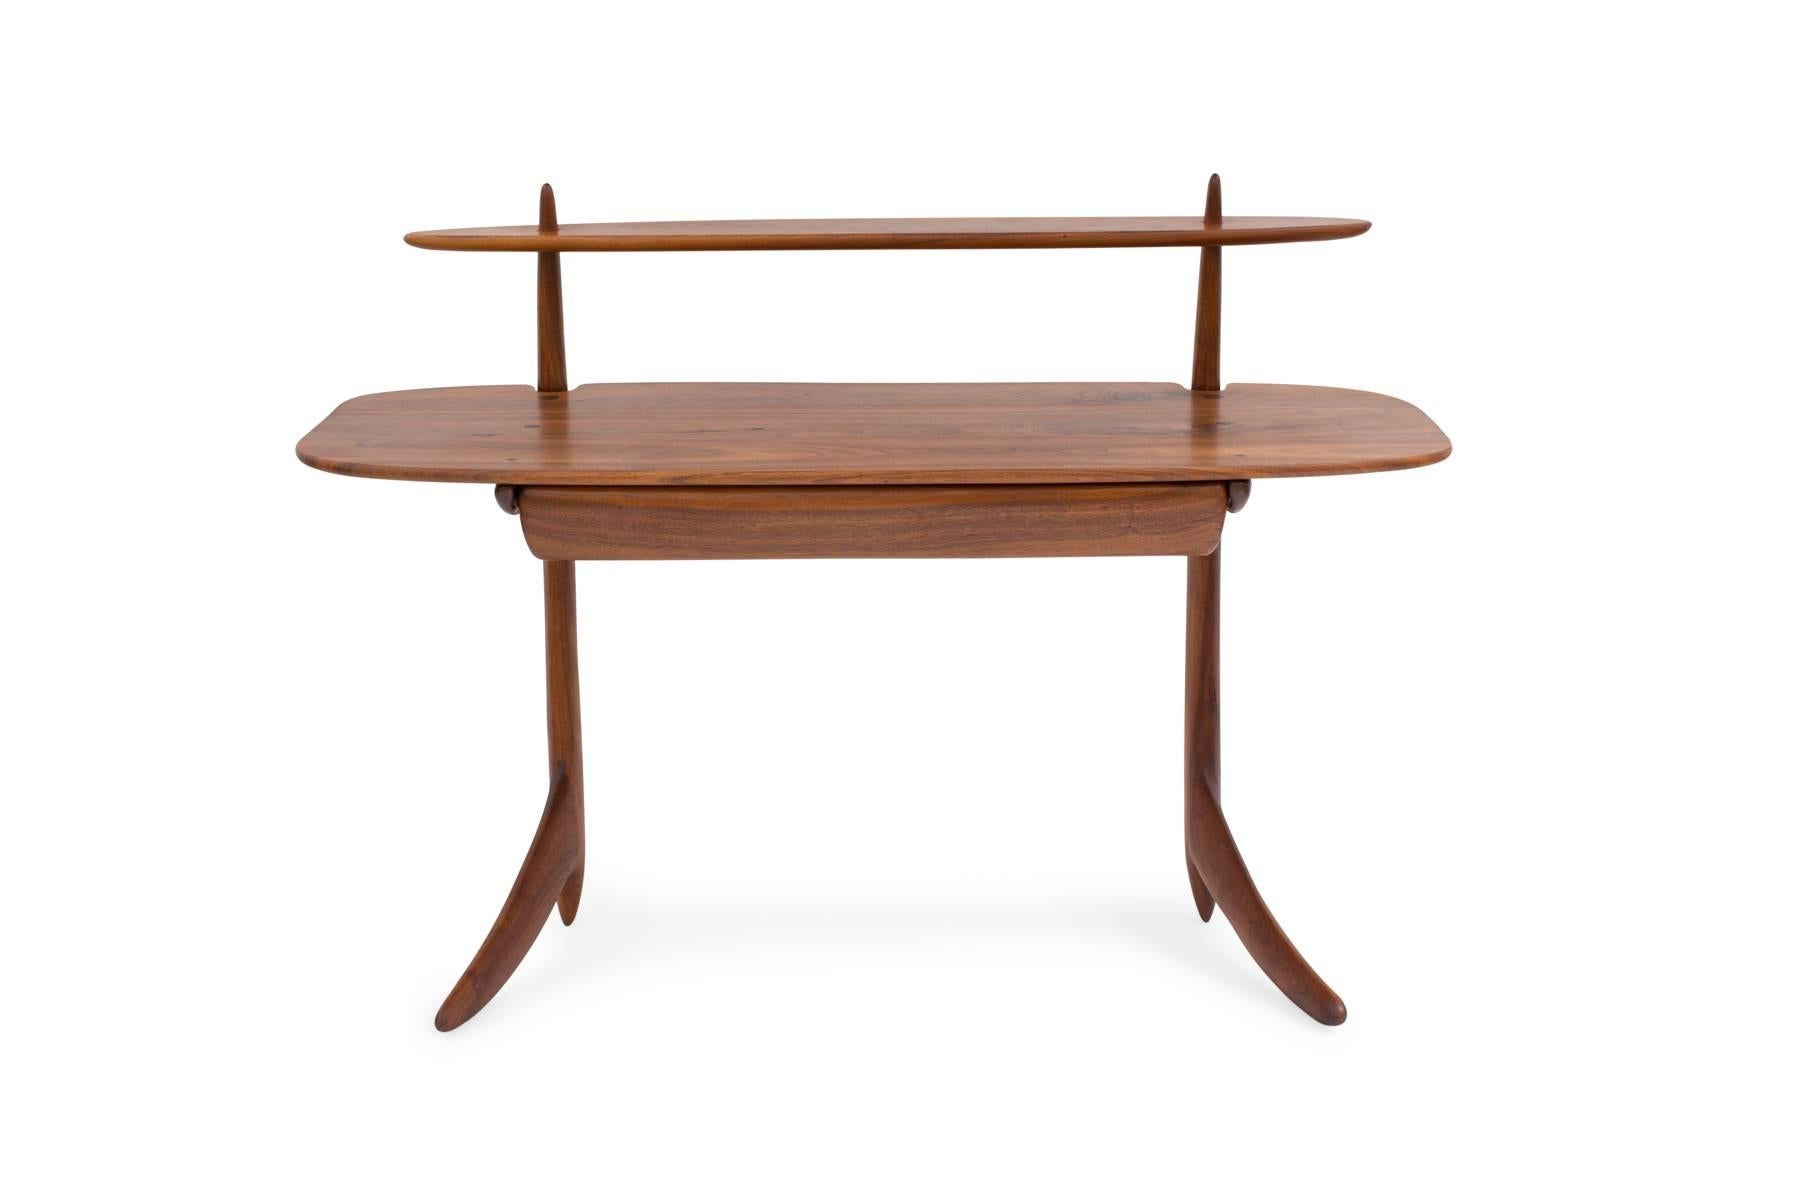 Allen Ditson solid walnut desk, circa late 1950s. This amazing example was commissioned in 1957 and is one of only a few that were ever made. It is executed in beautifully grained solid walnut and has one large drawer, second tier and incredibly